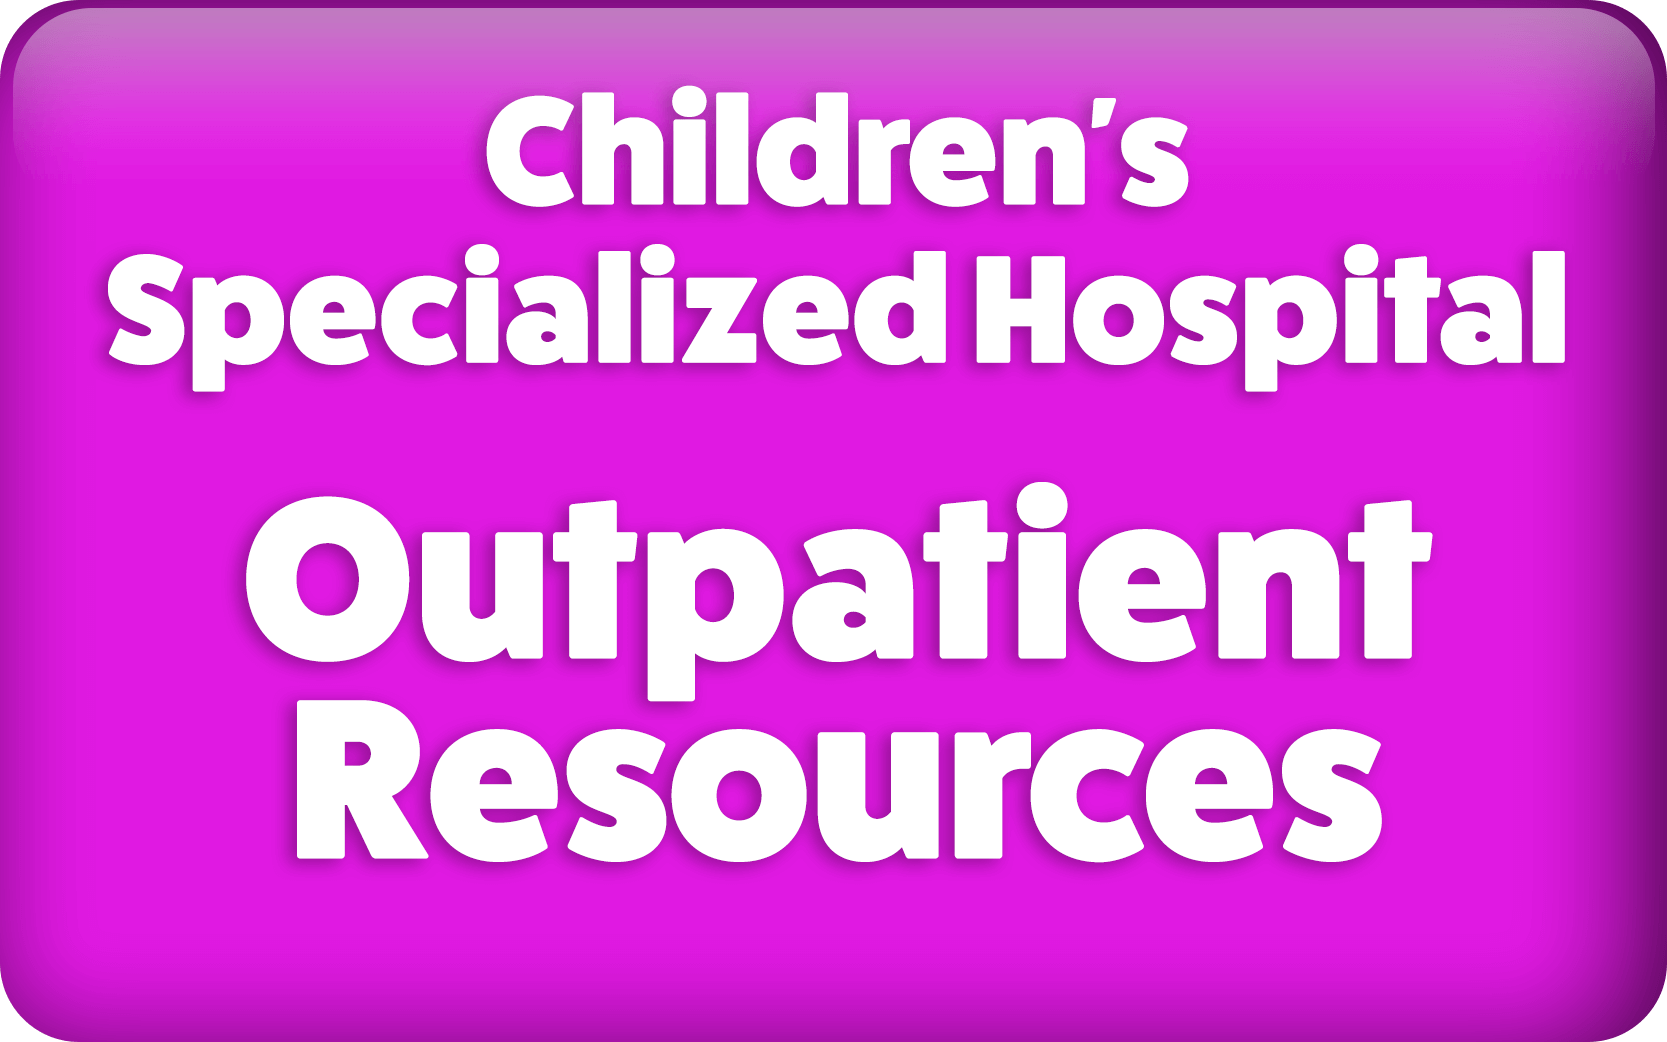 Children's Specialized Hospital Outpatient Resources